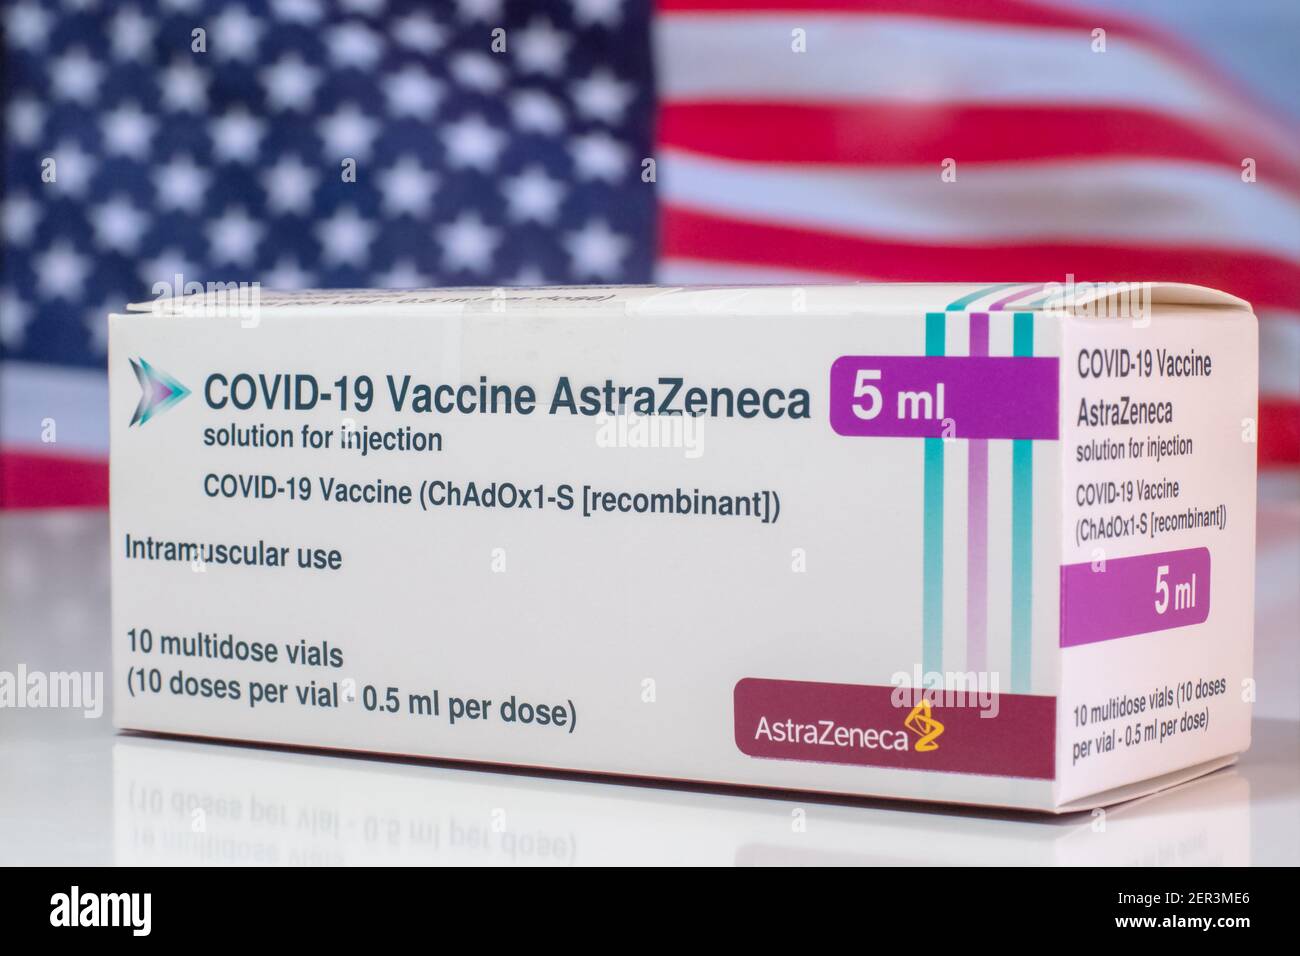 AstraZeneca vaccine for preventing COVID 19 disease. United States flag. Worldwide pandemic vaccination with the Astra Zeneca vaccine Stock Photo